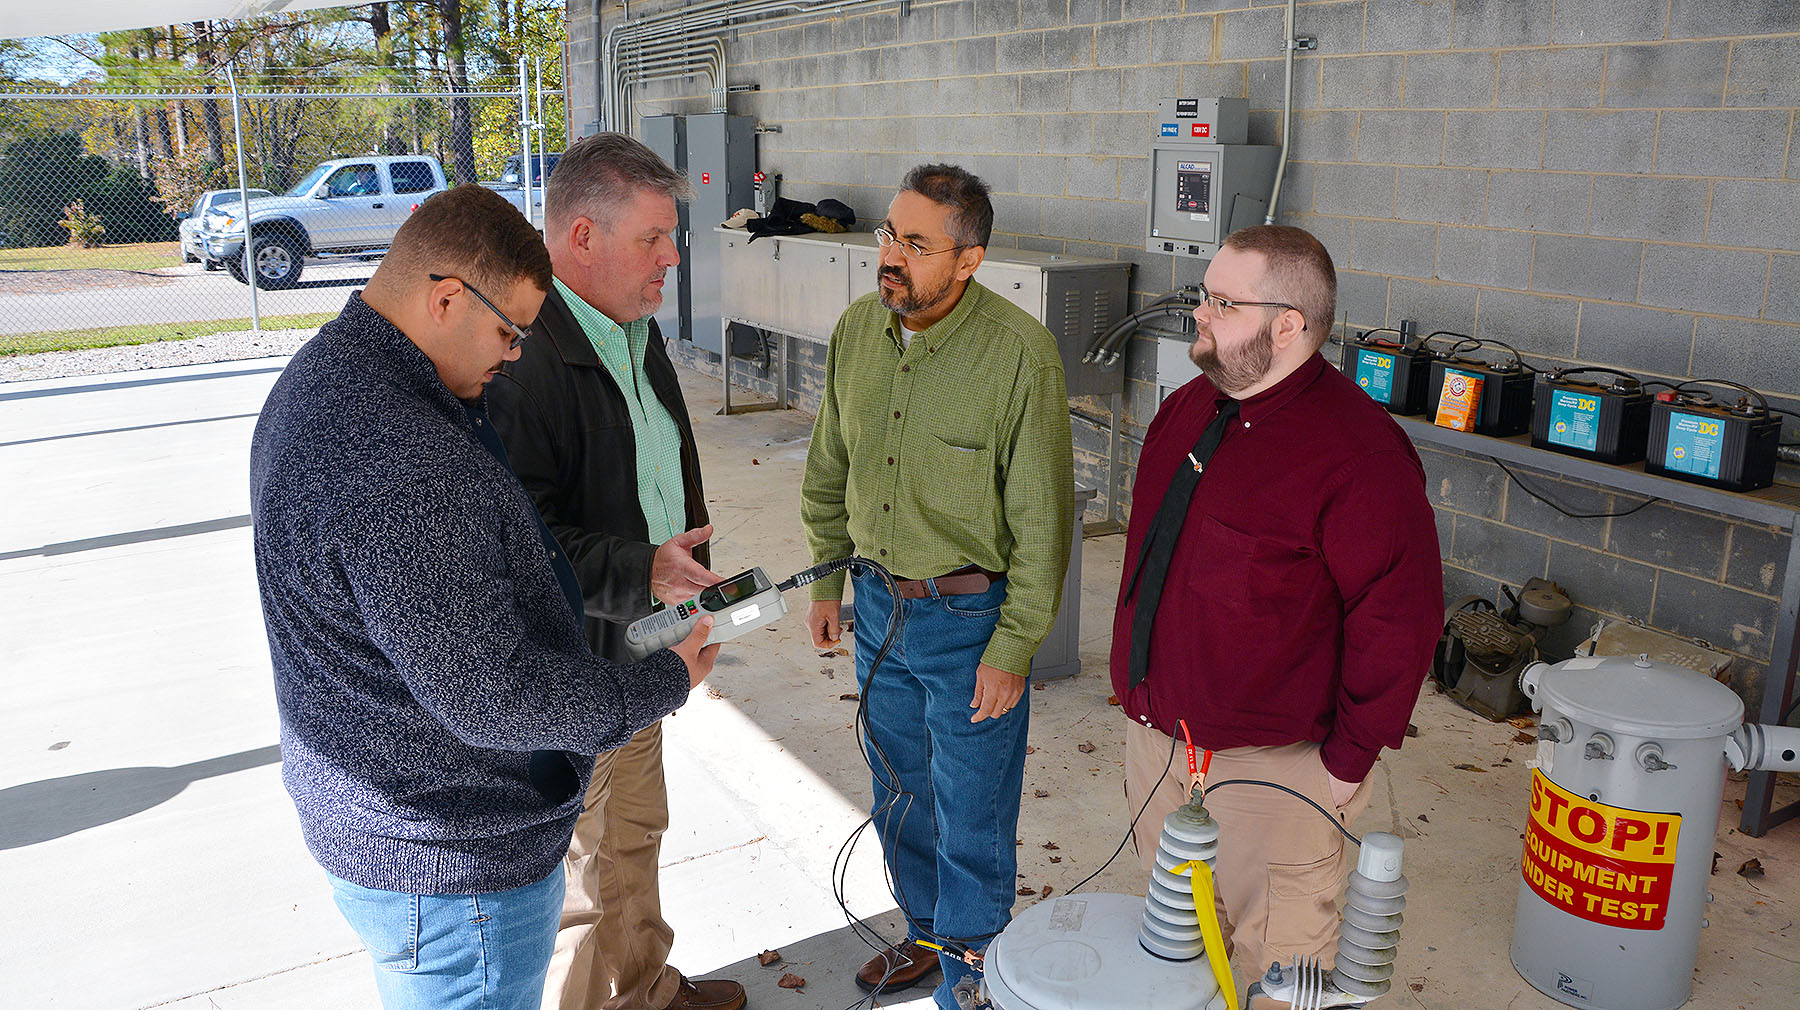 EUSRT students and instructor stand in substation with test device